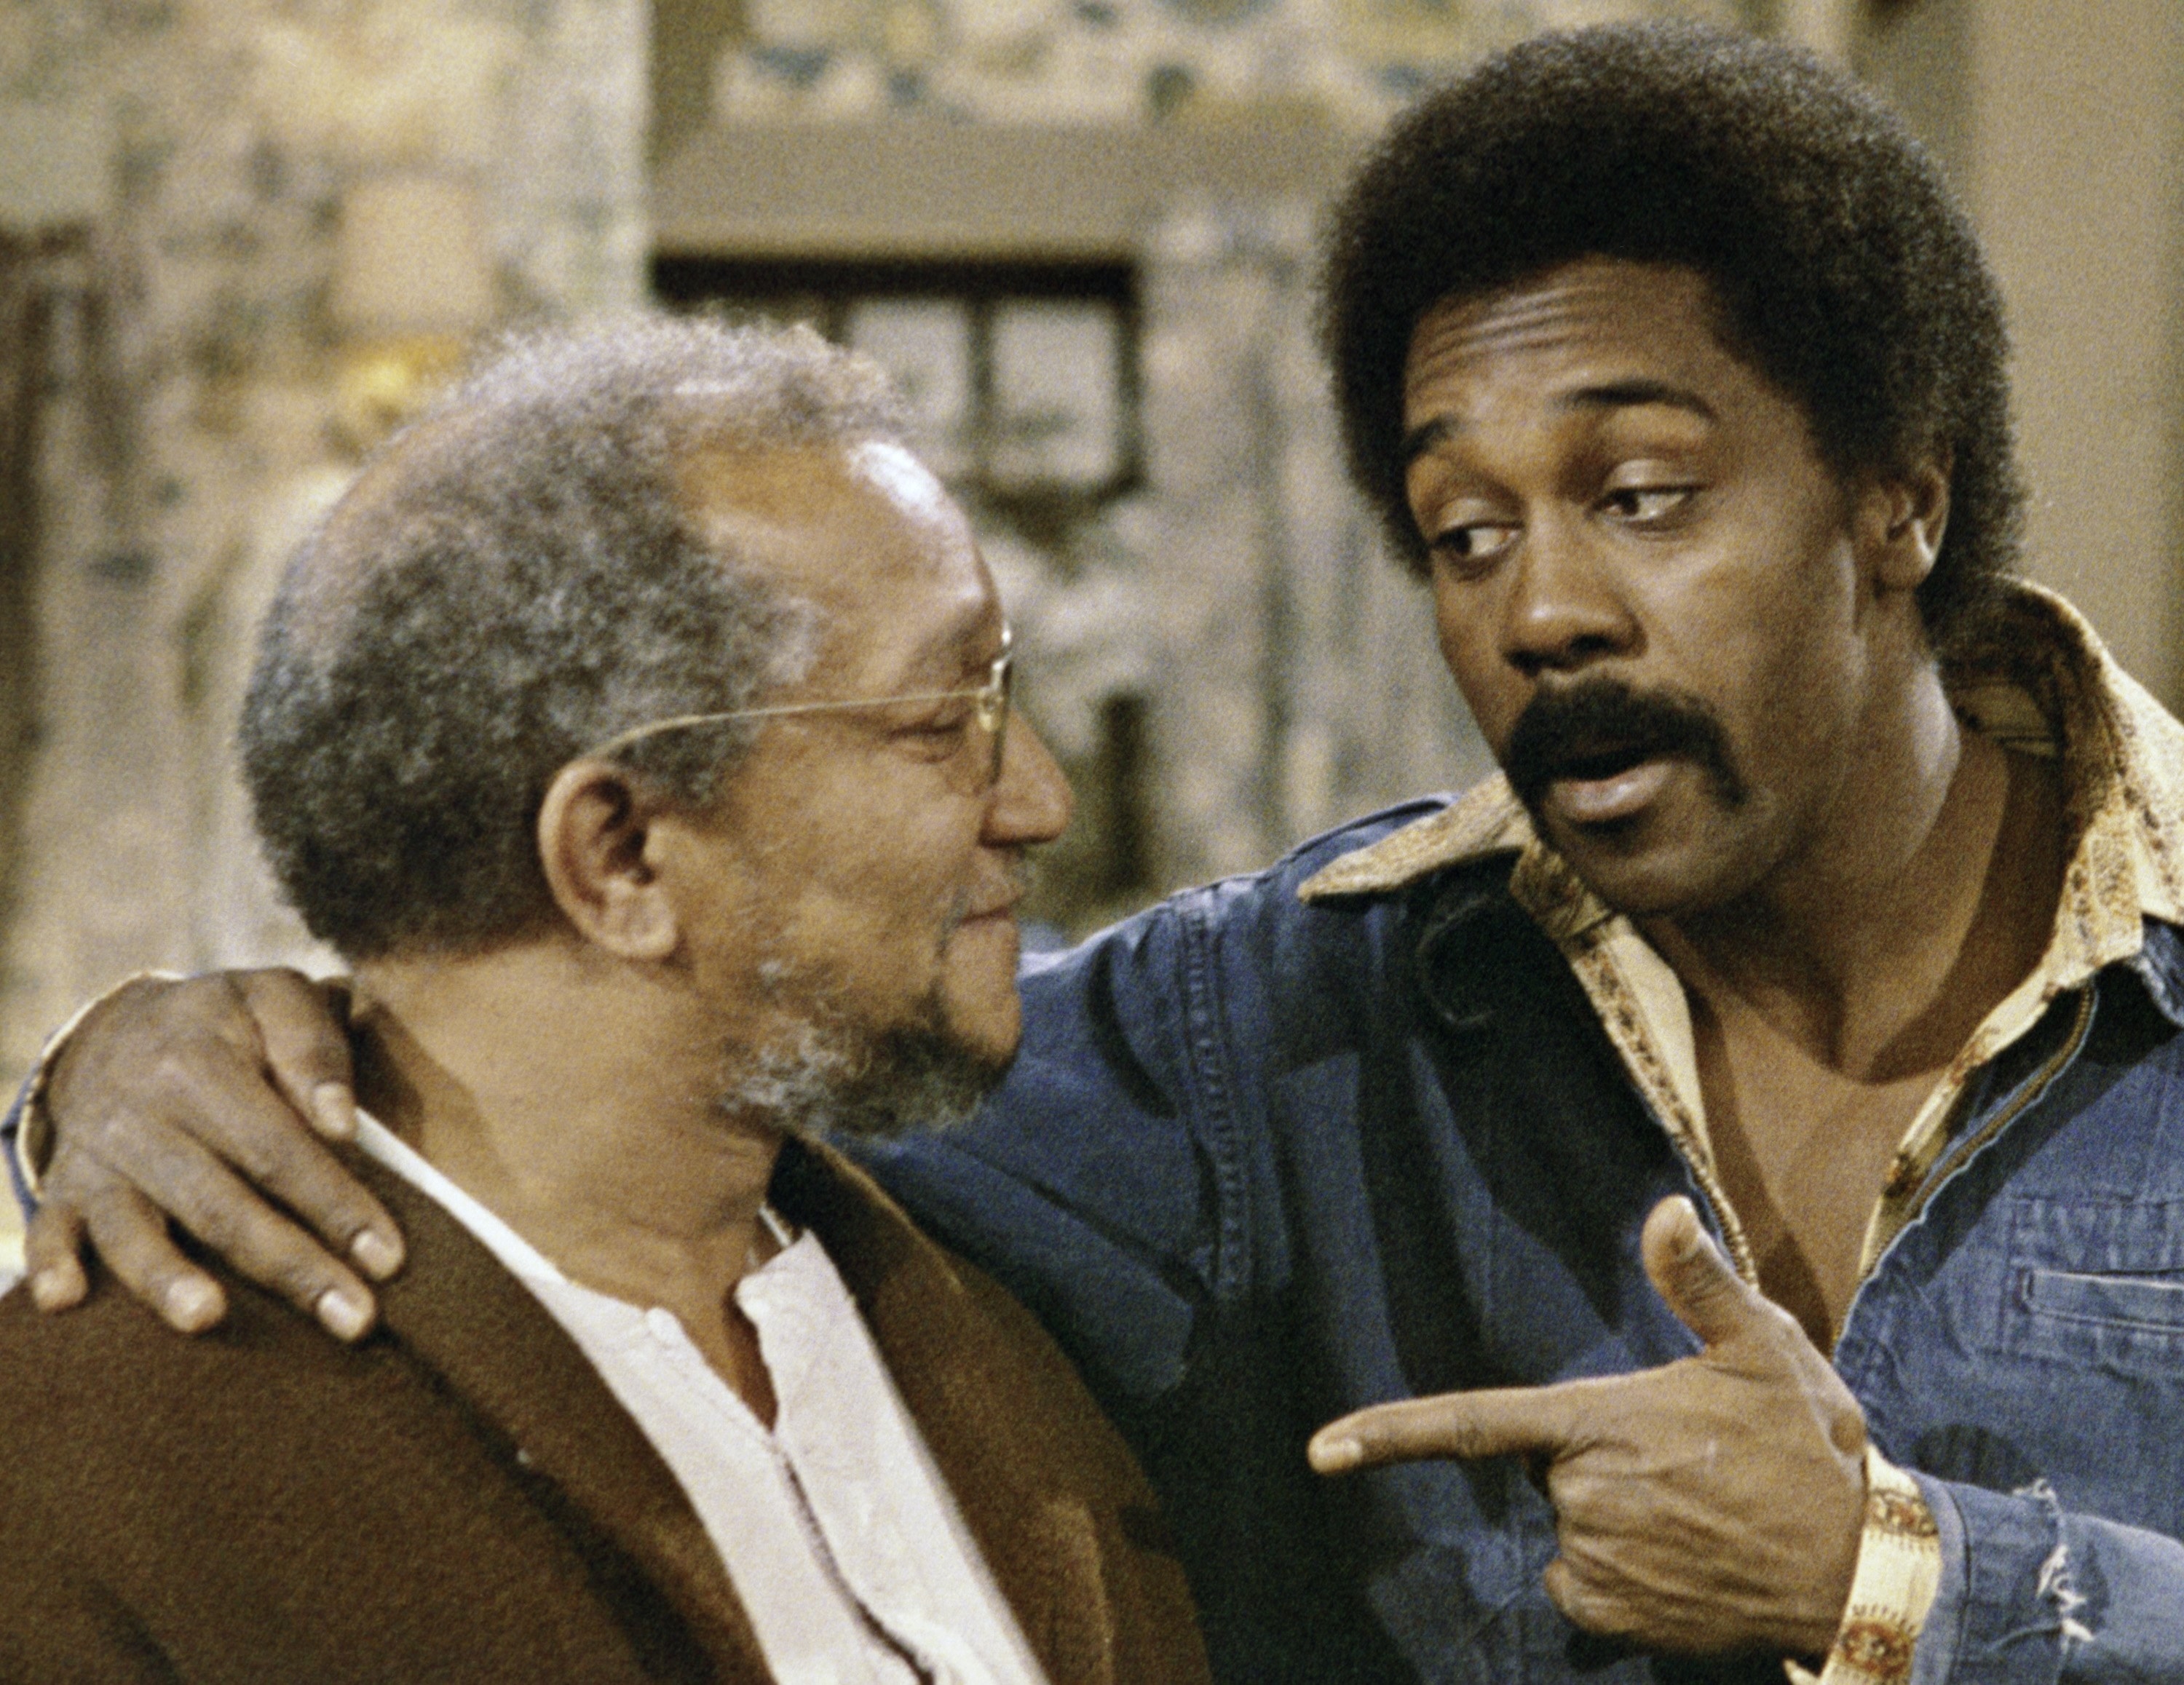 A still from Sanford and Son